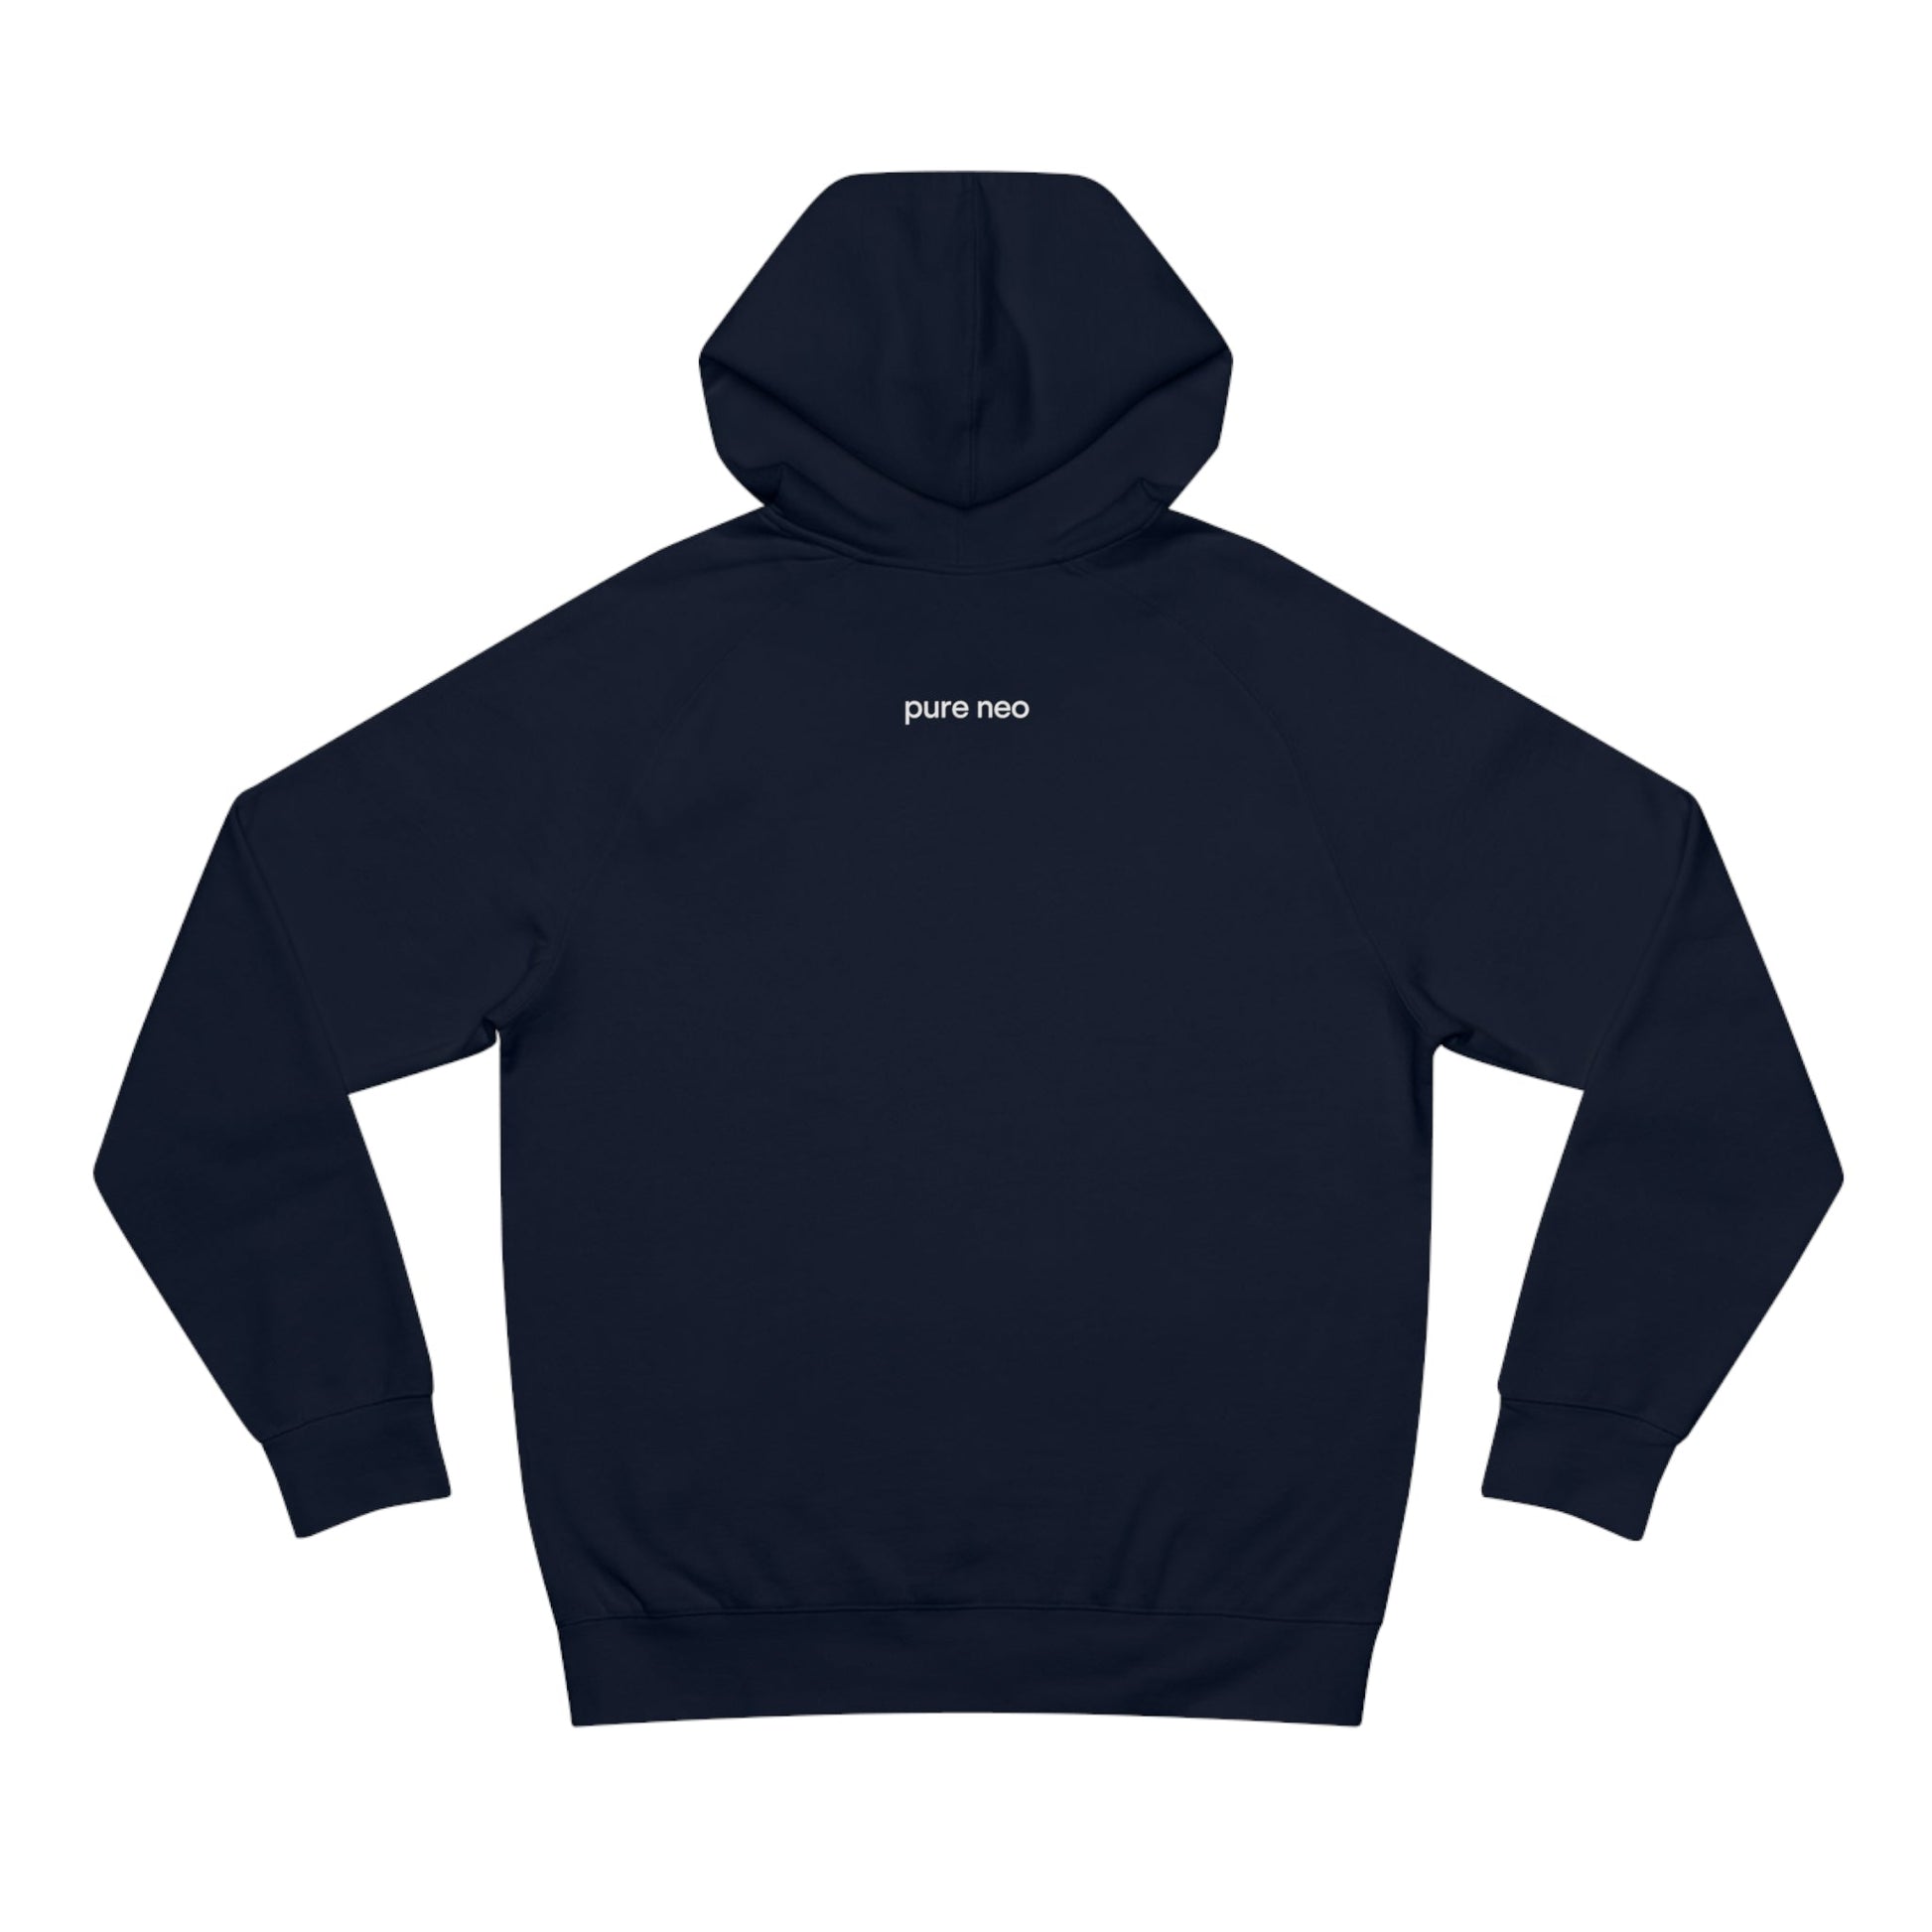 My soundstage is bigger than yours hoodie - Pure Neo Shop